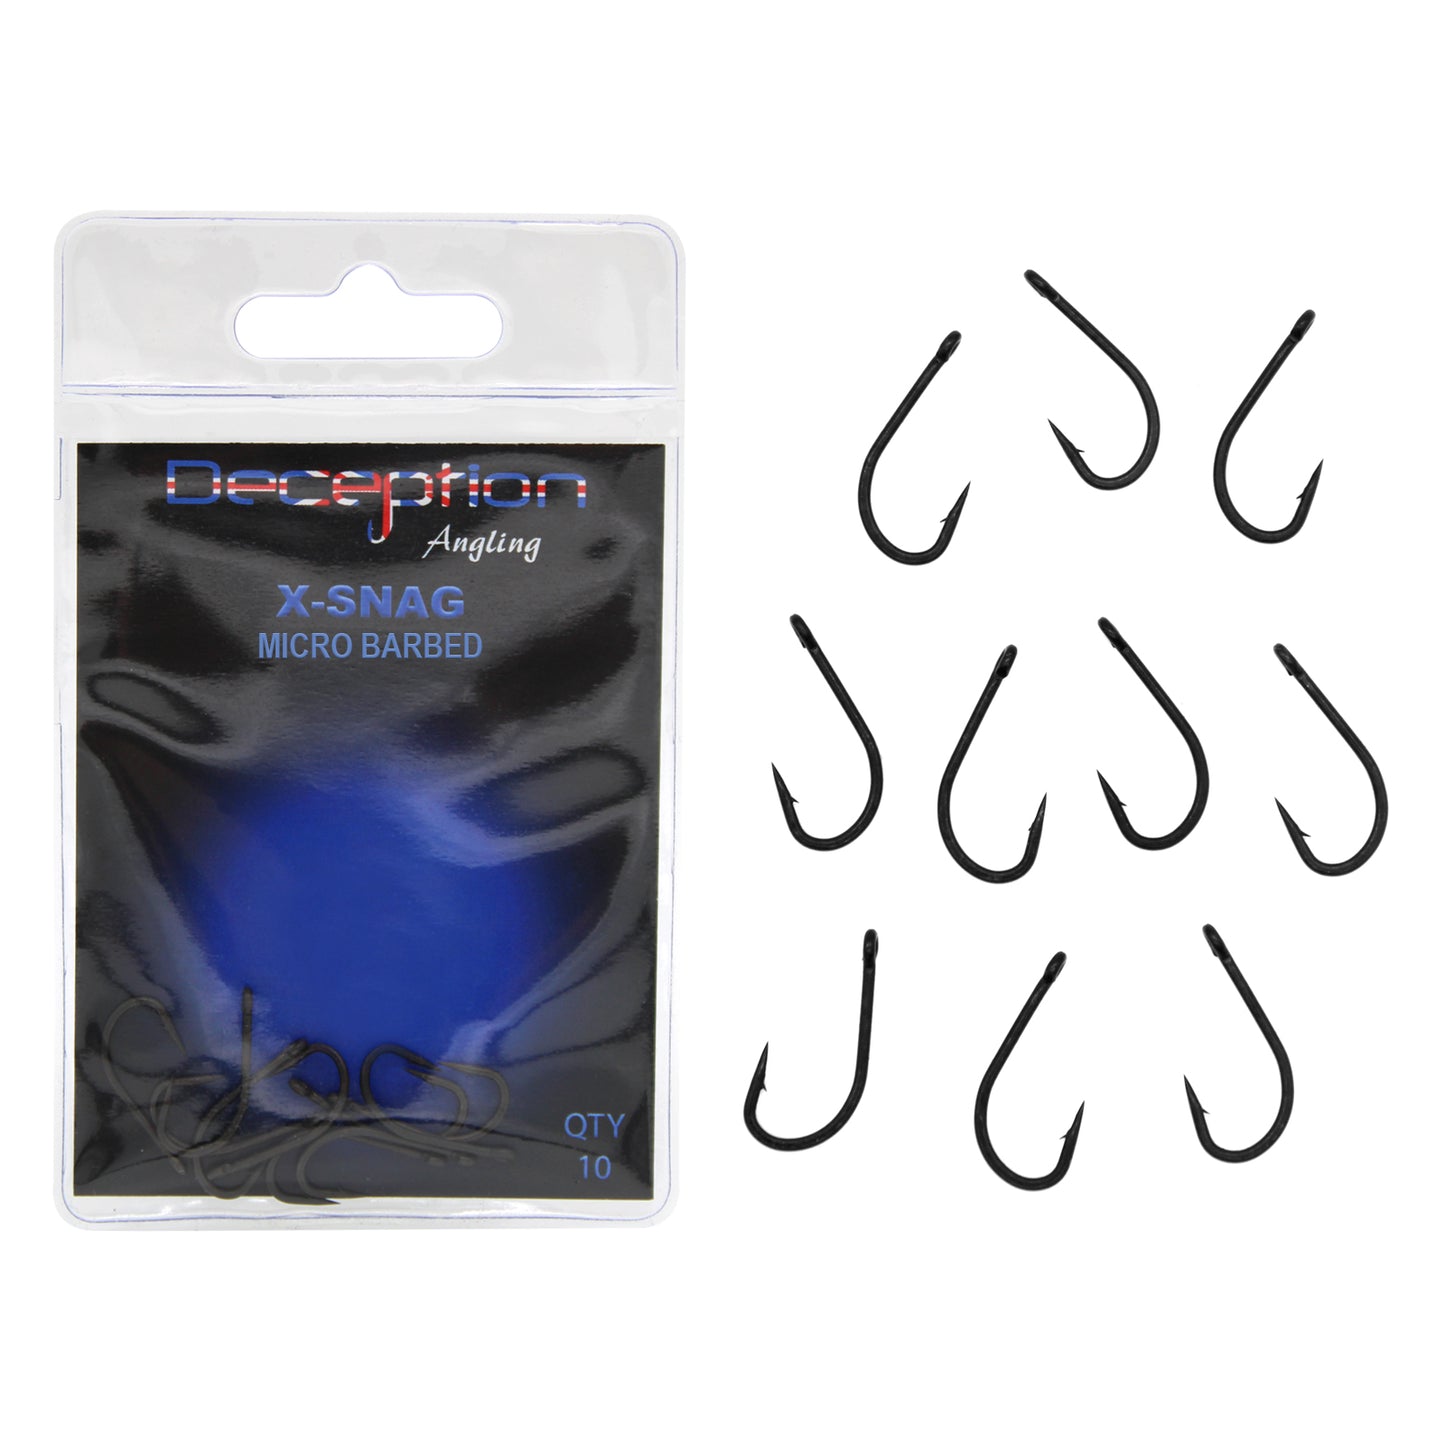 Deception Angling X-Snag Micro Barbed Fishing Hooks Pack of 10